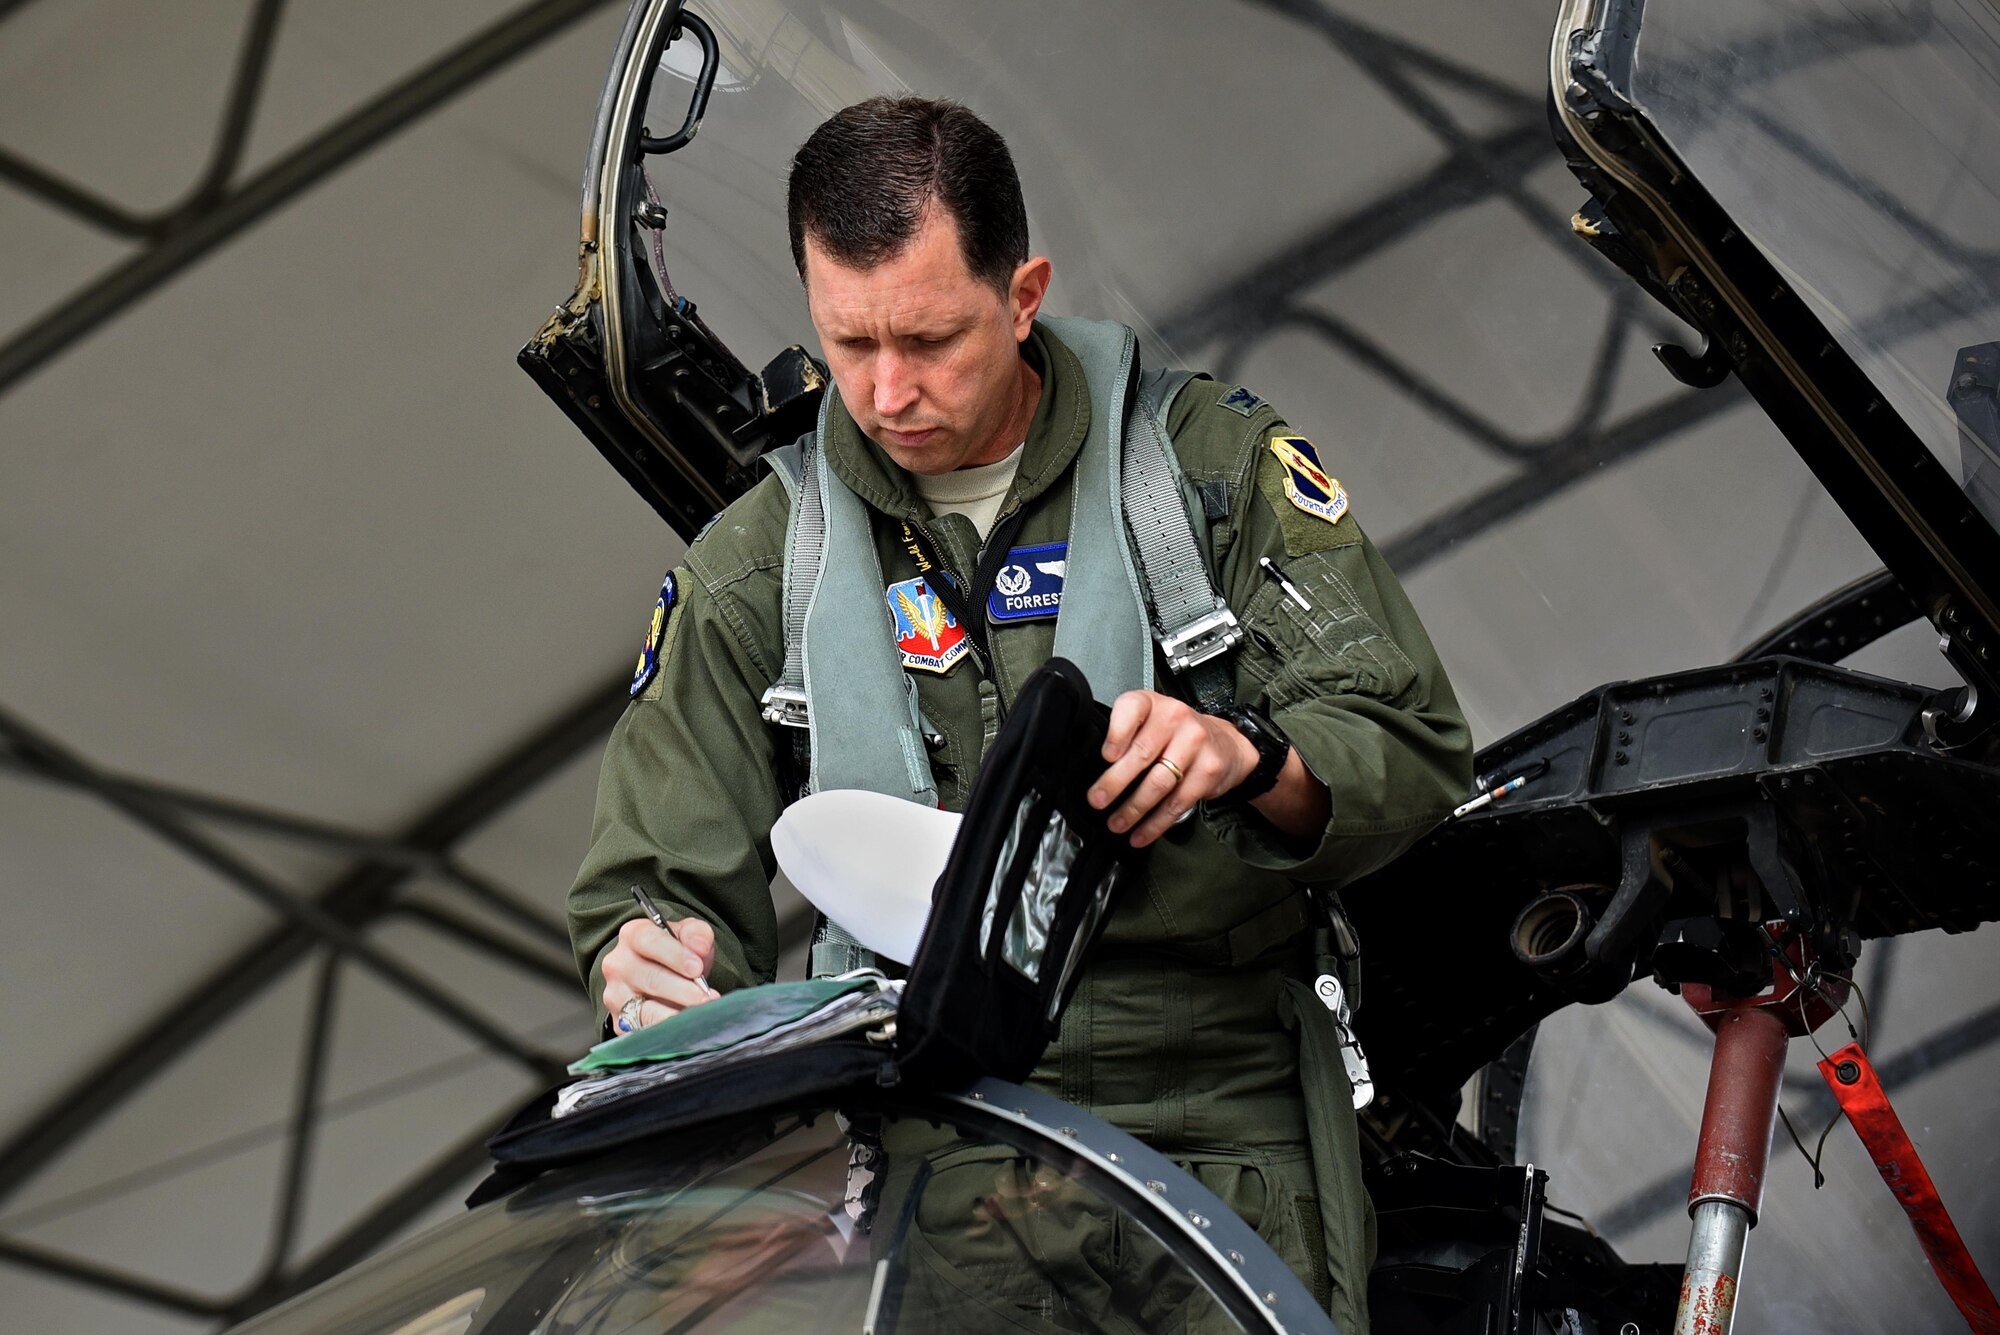 Col. Christopher Sage, 4th Fighter Wing commander, signs aircraft maintenance forms prior to take-off, Nov. 30, 2016, at Seymour Johnson Air Force Base, North Carolina. The maintenance forms indicate who previously repaired the aircraft and is signed off by the pilot. (U.S. Air Force photo by Airman 1st Class Kenneth Boyton)